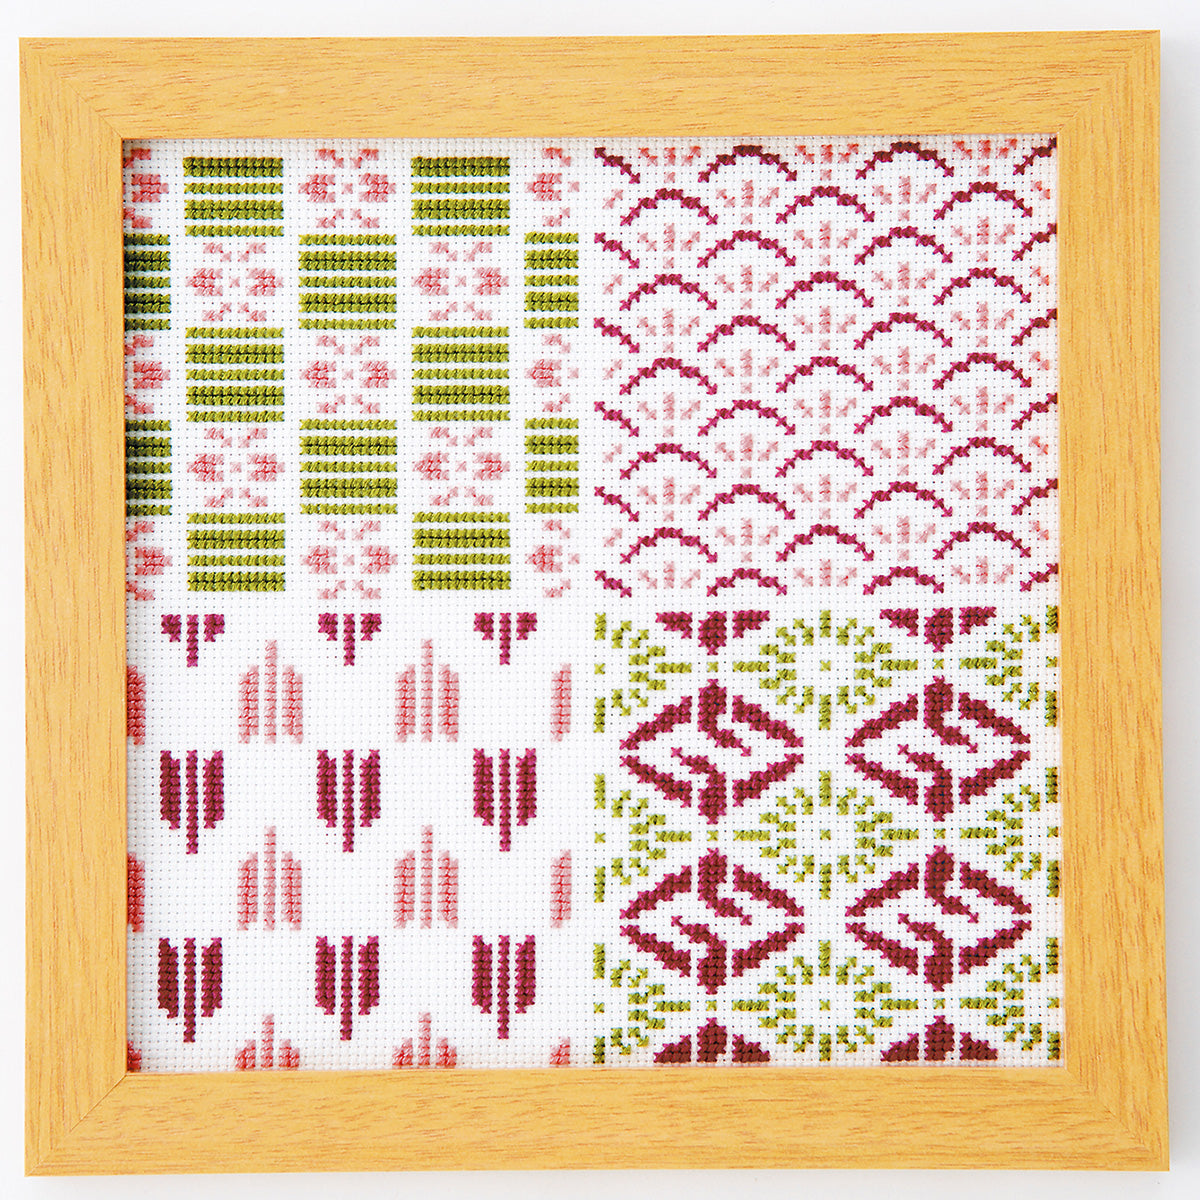 Japanese Designs Cross Stitch Kit - Pink and Green